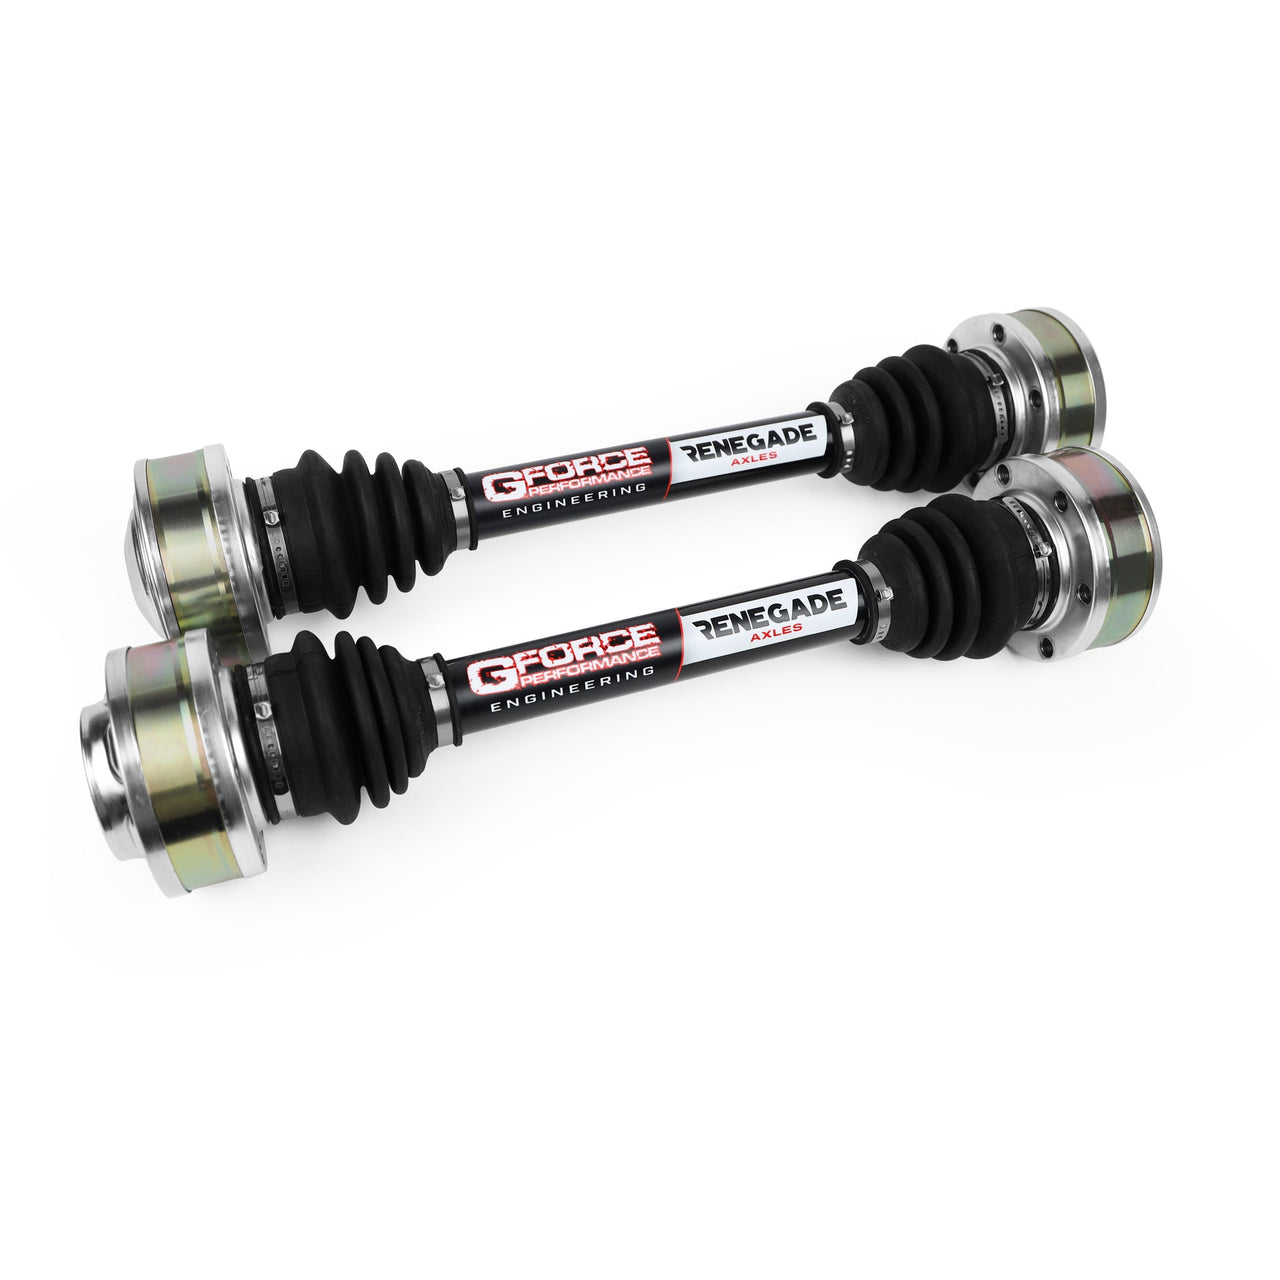 G-FORCE PERFORMANCE GTO VZ COMMODORE RENEGADE AXLE SET